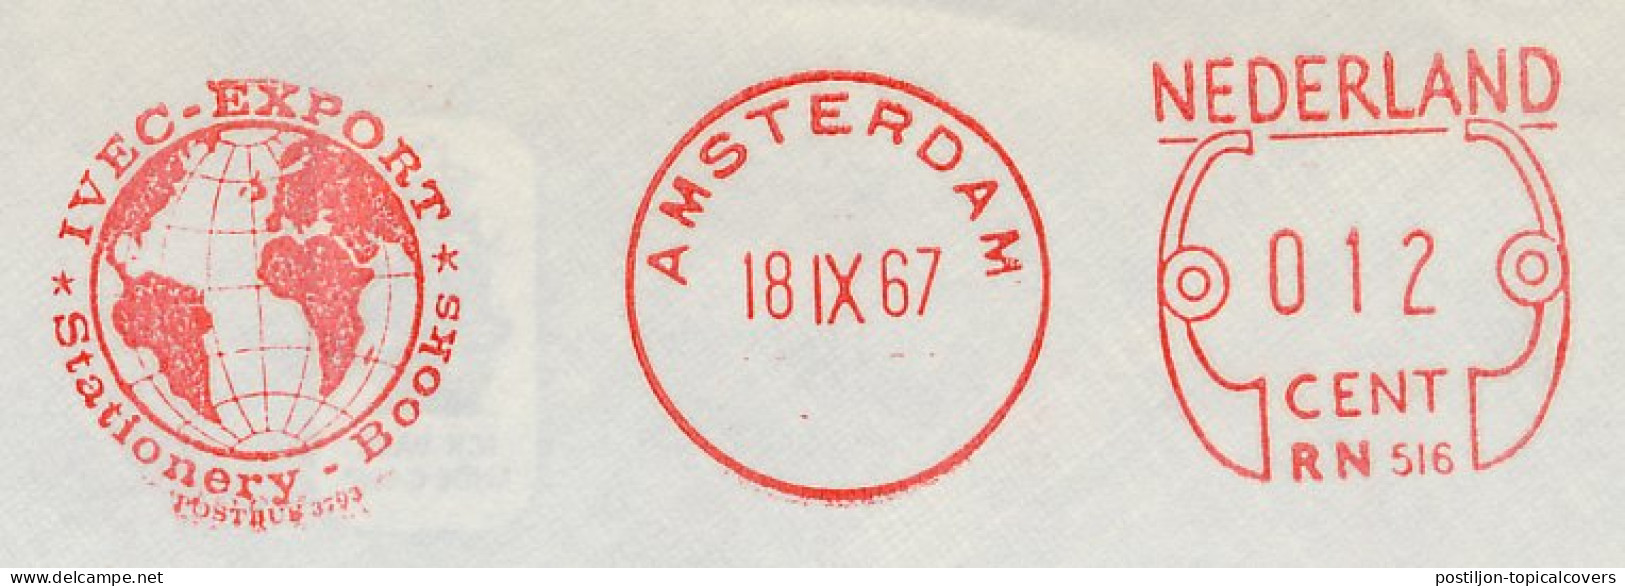 Meter Cover Netherlands 1967 - Neopost 516 Globe - Amsterdam  - Geography